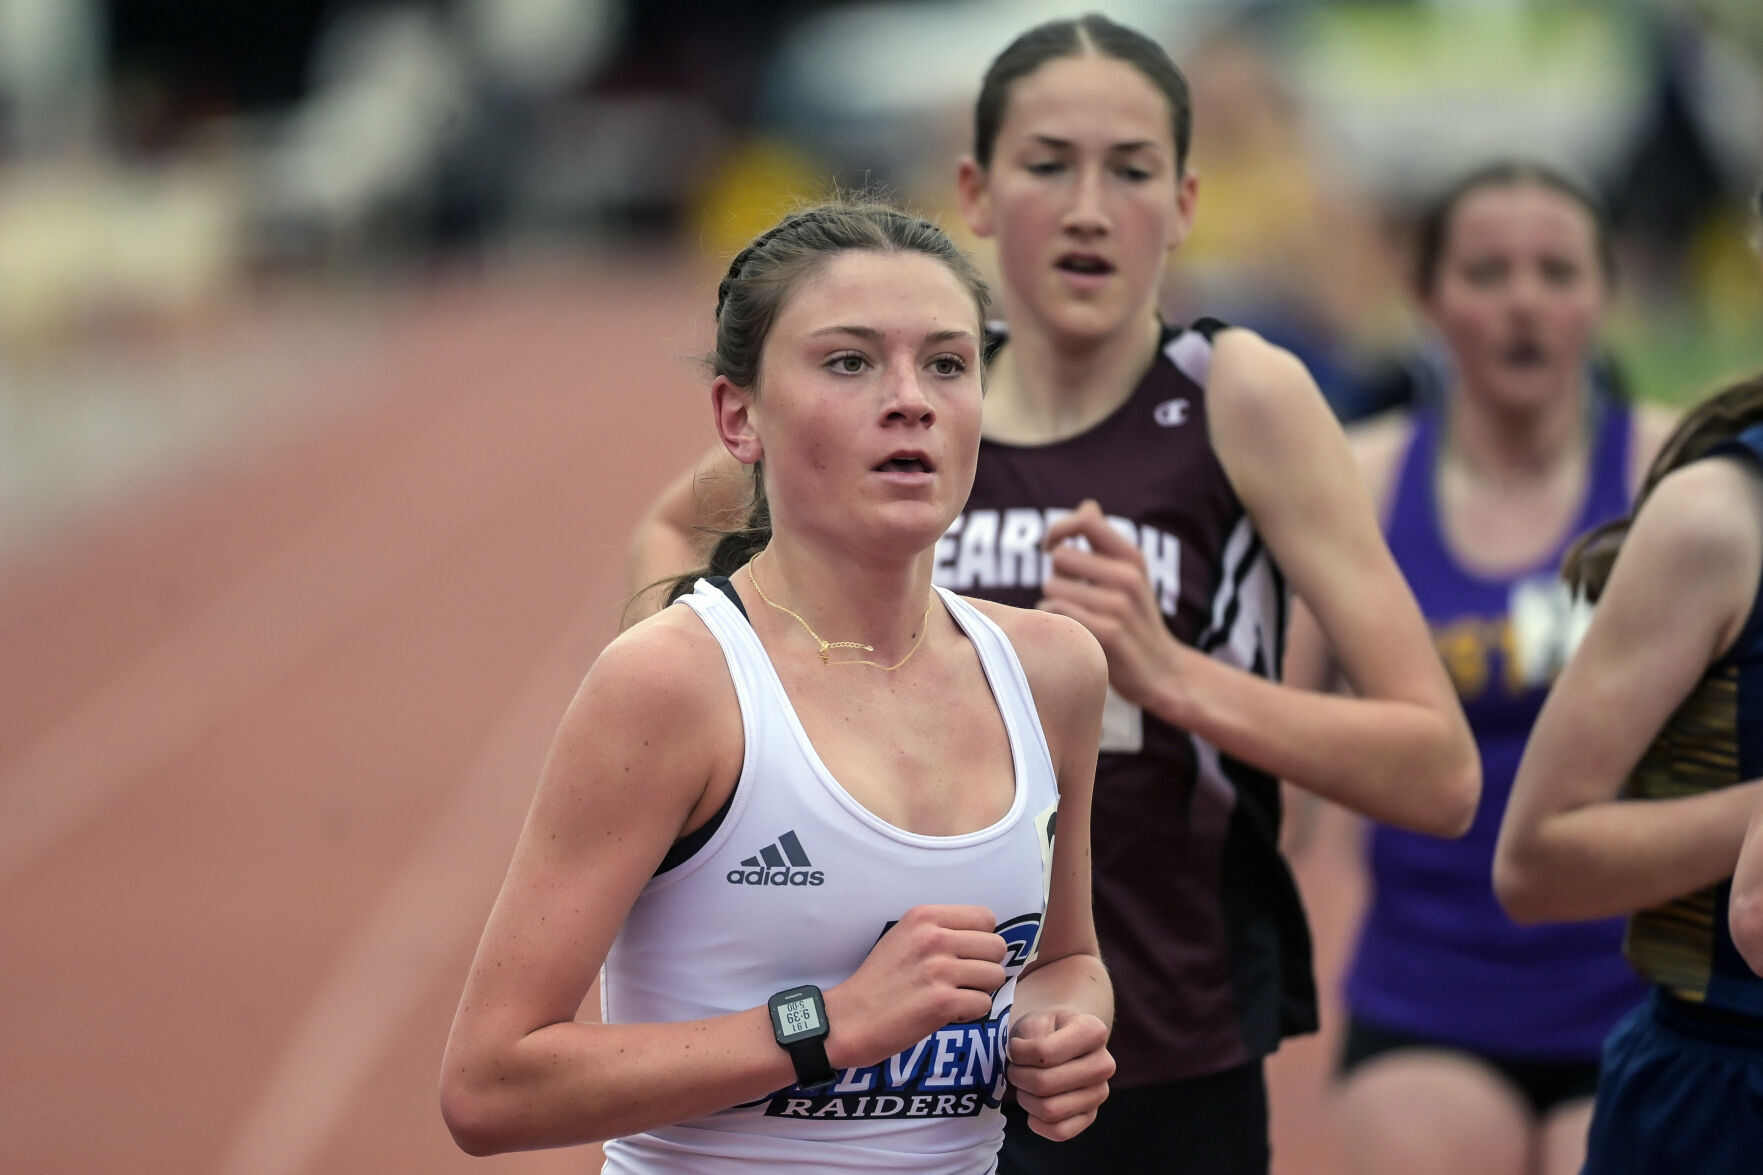 Spearfish Girls Set New School Record in Relay & Individual Athletes Shine at Queen City Classic